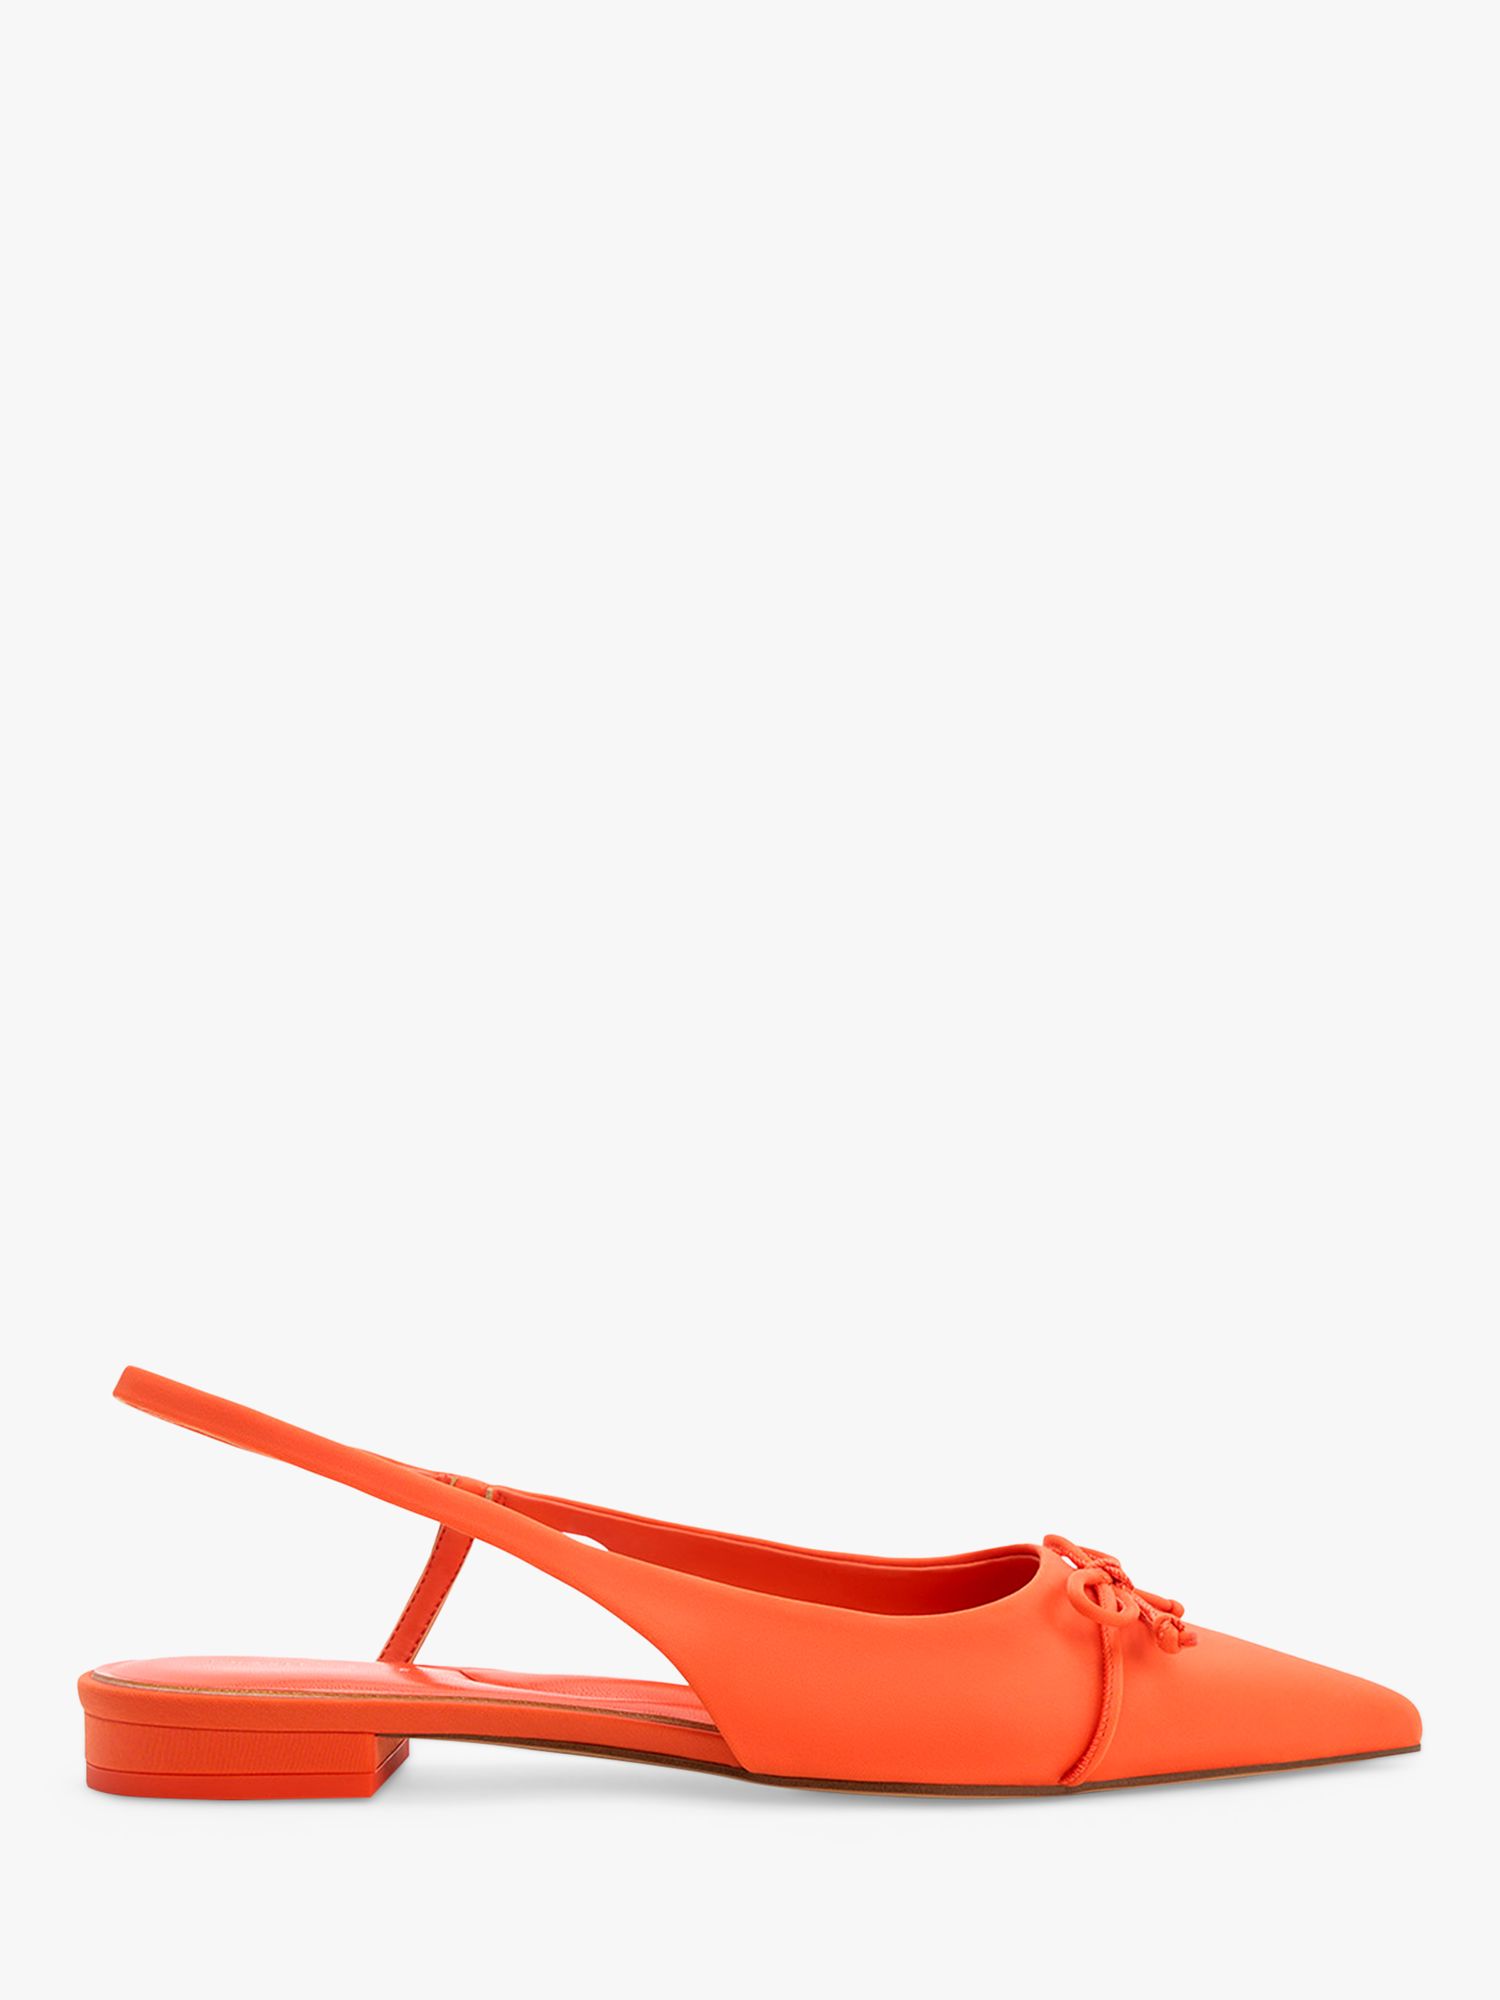 CHARLES & KEITH Bow Detail Pointed Pumps, Orange at John Lewis & Partners